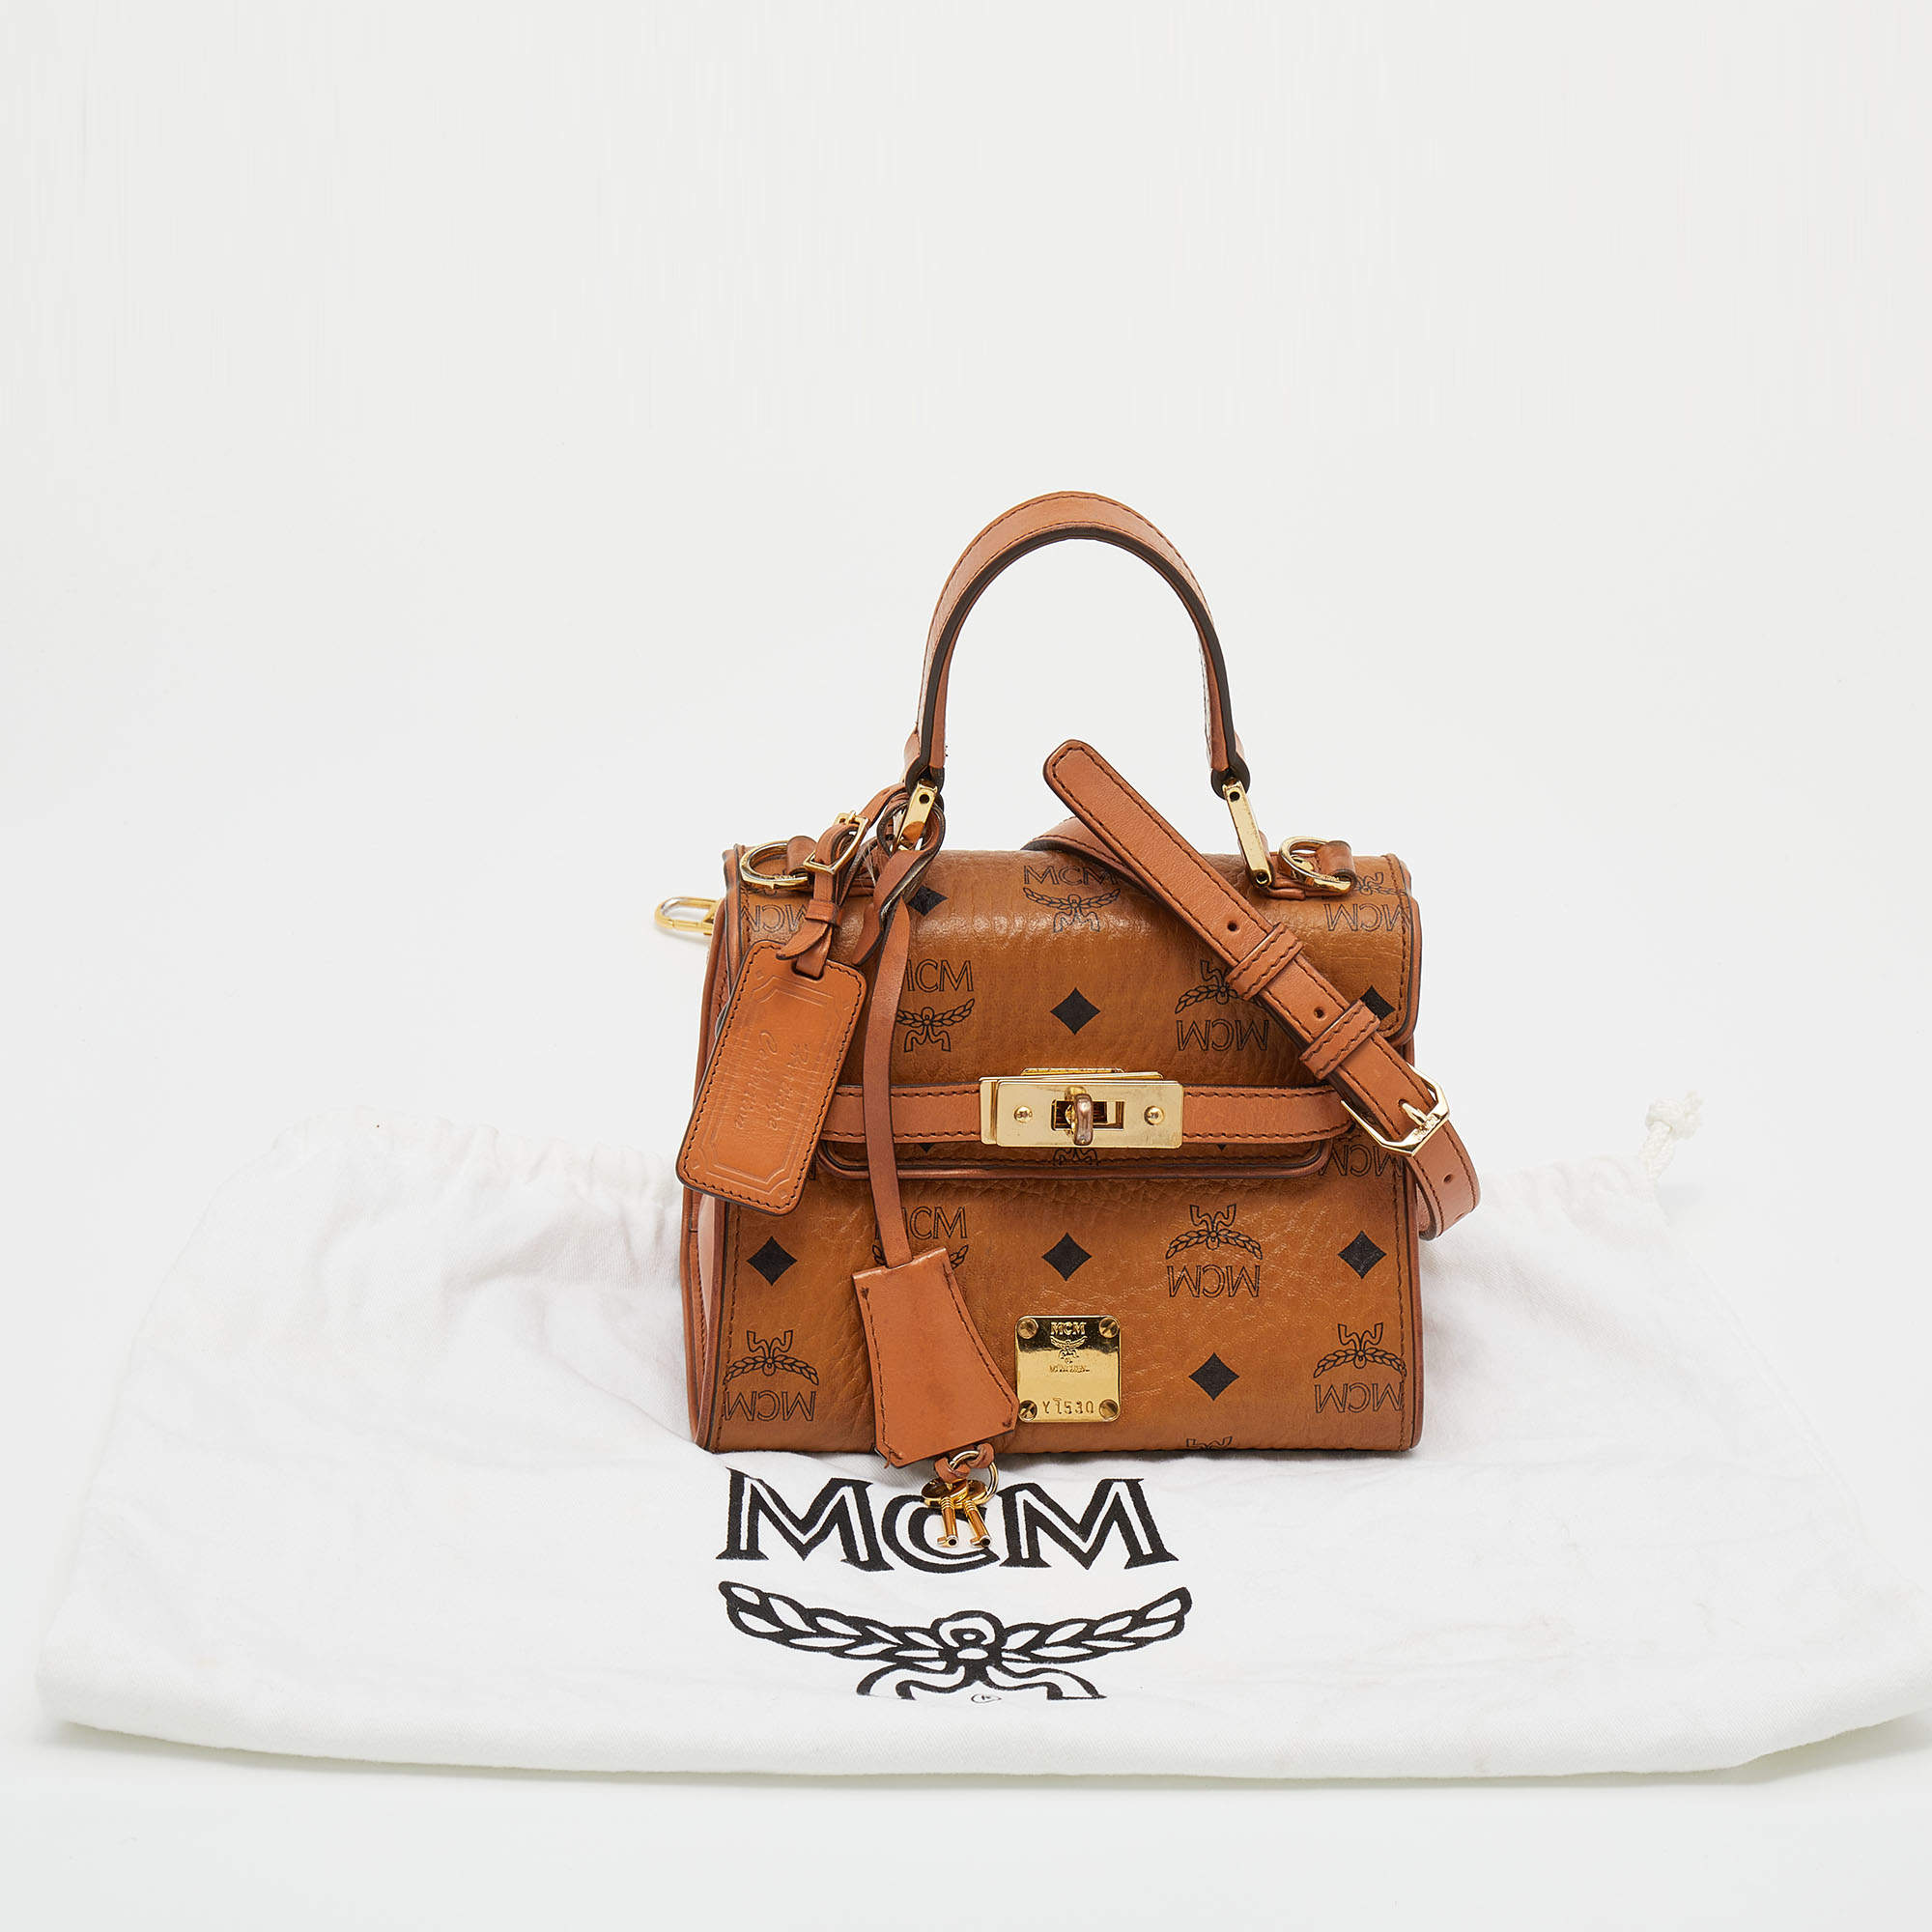 MCM Women Bags Mini Bags Heritage Satchel in Visetos, Accessorising -  Brand Name / Designer Handbags For Carry & Wear Share If You Care!